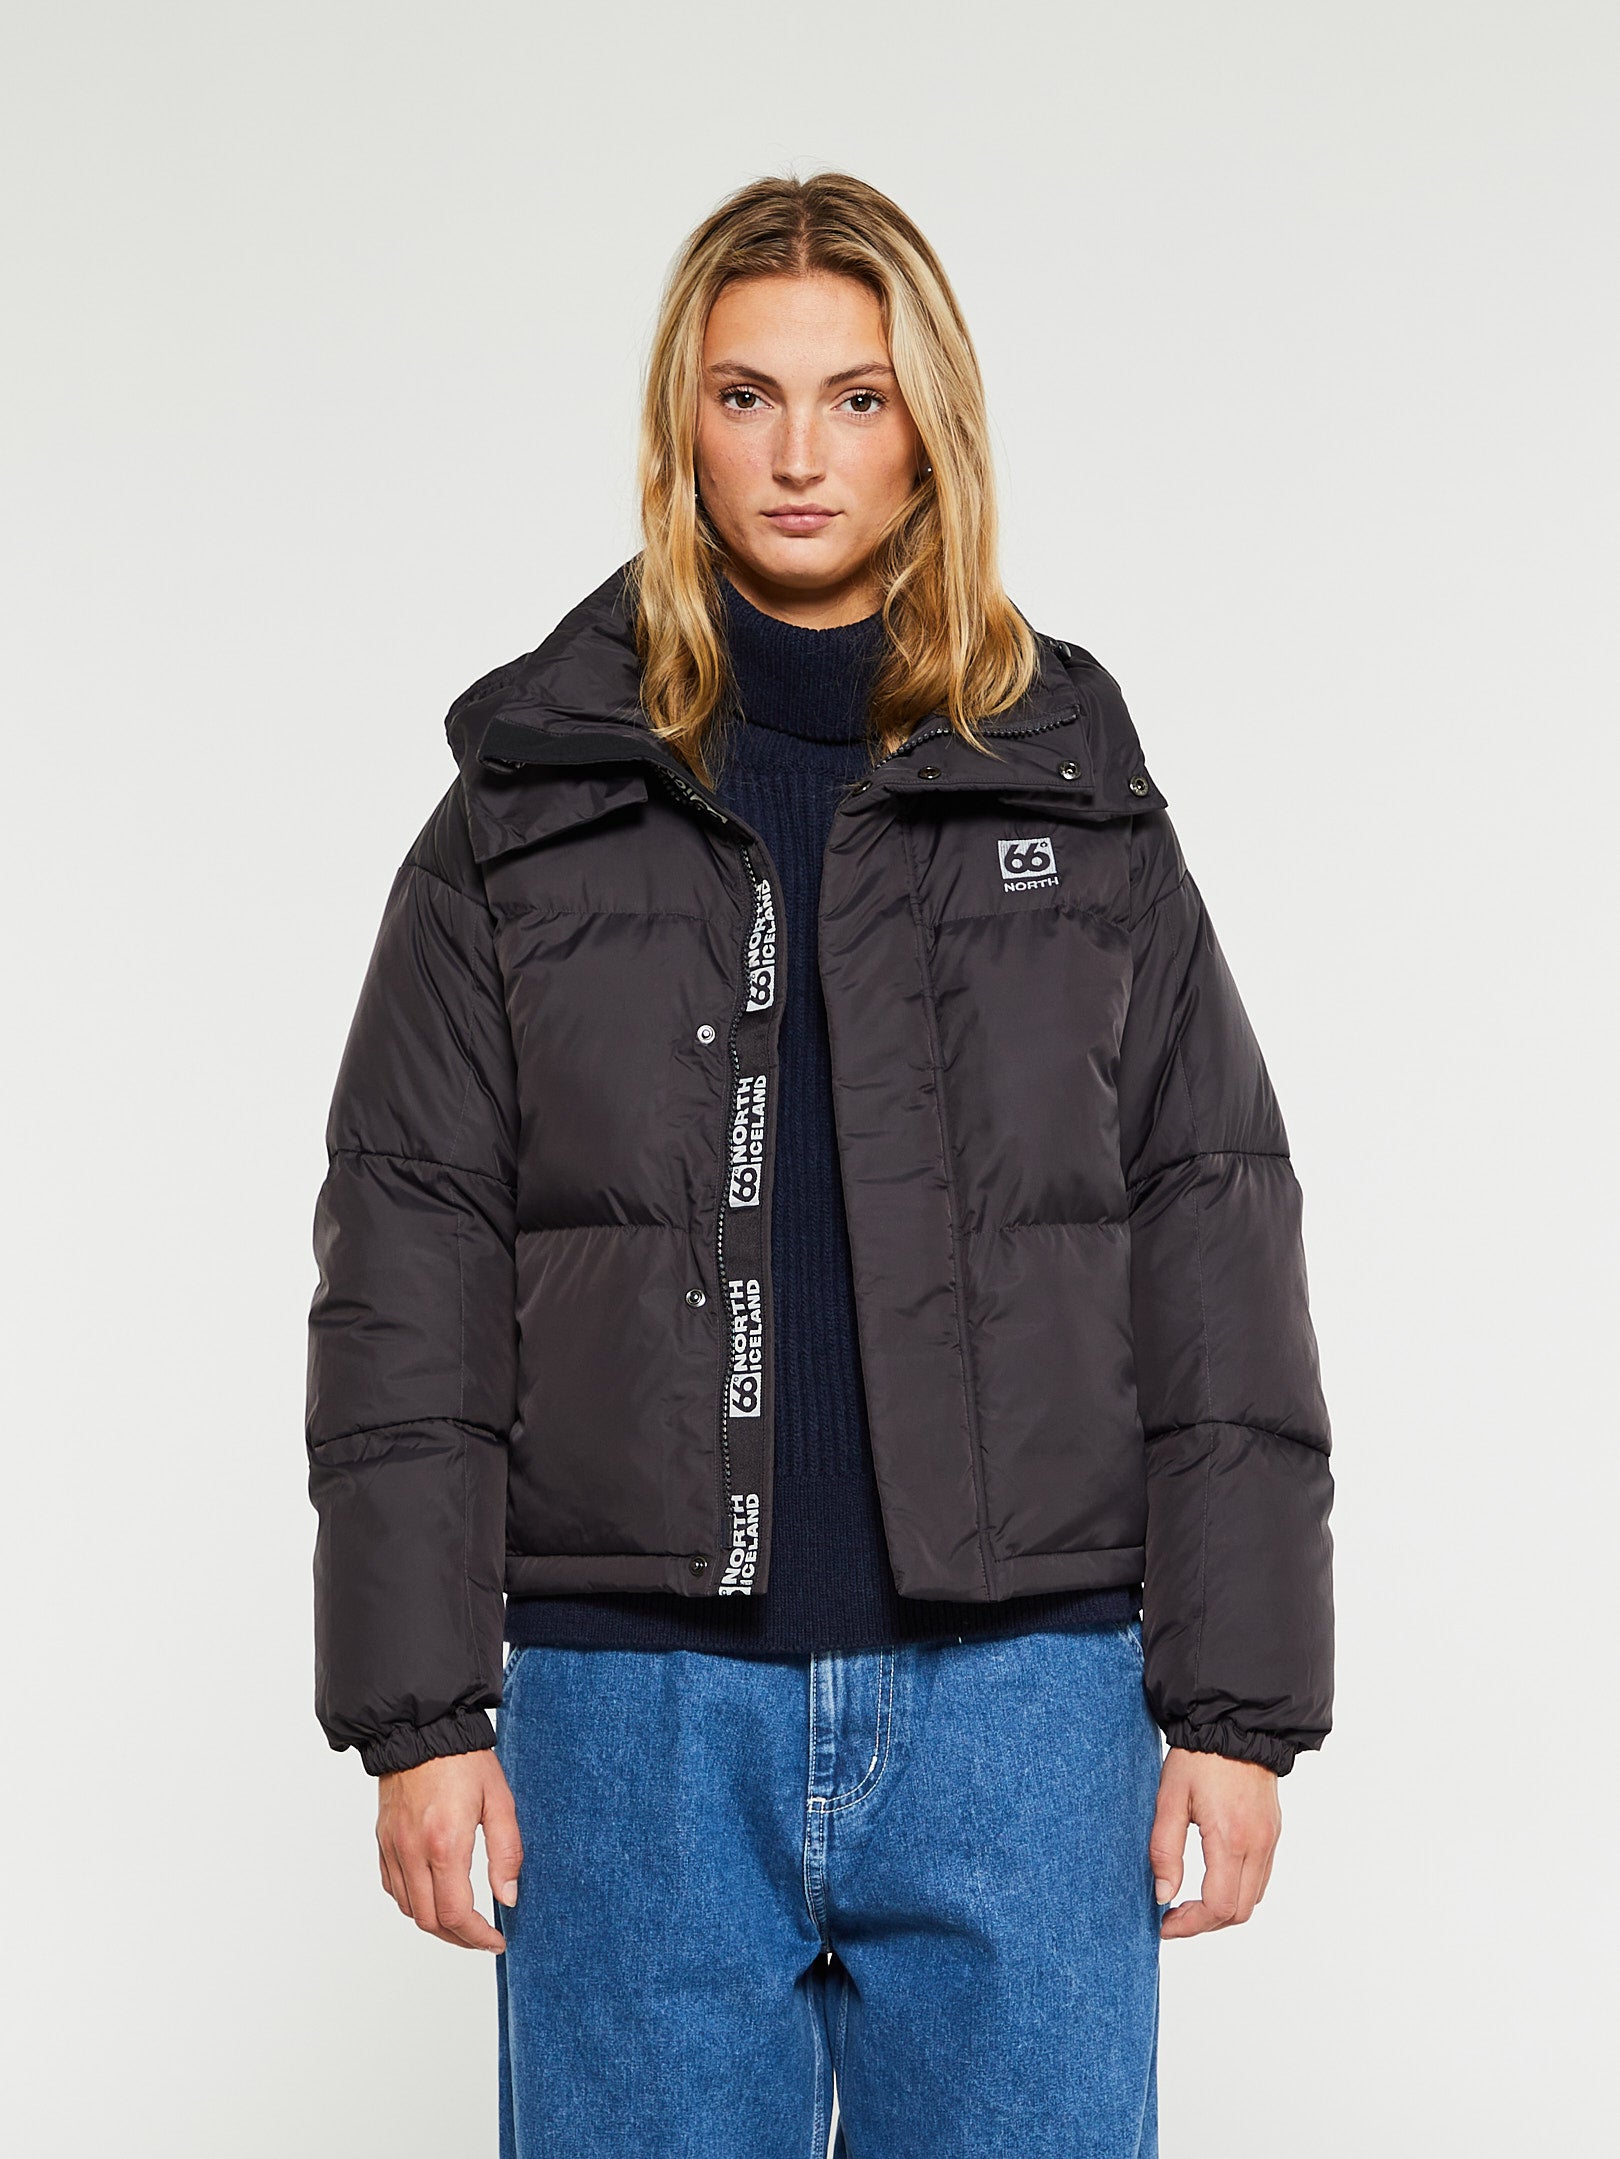 the stoy selection | at & for Shop Coats Jackets women